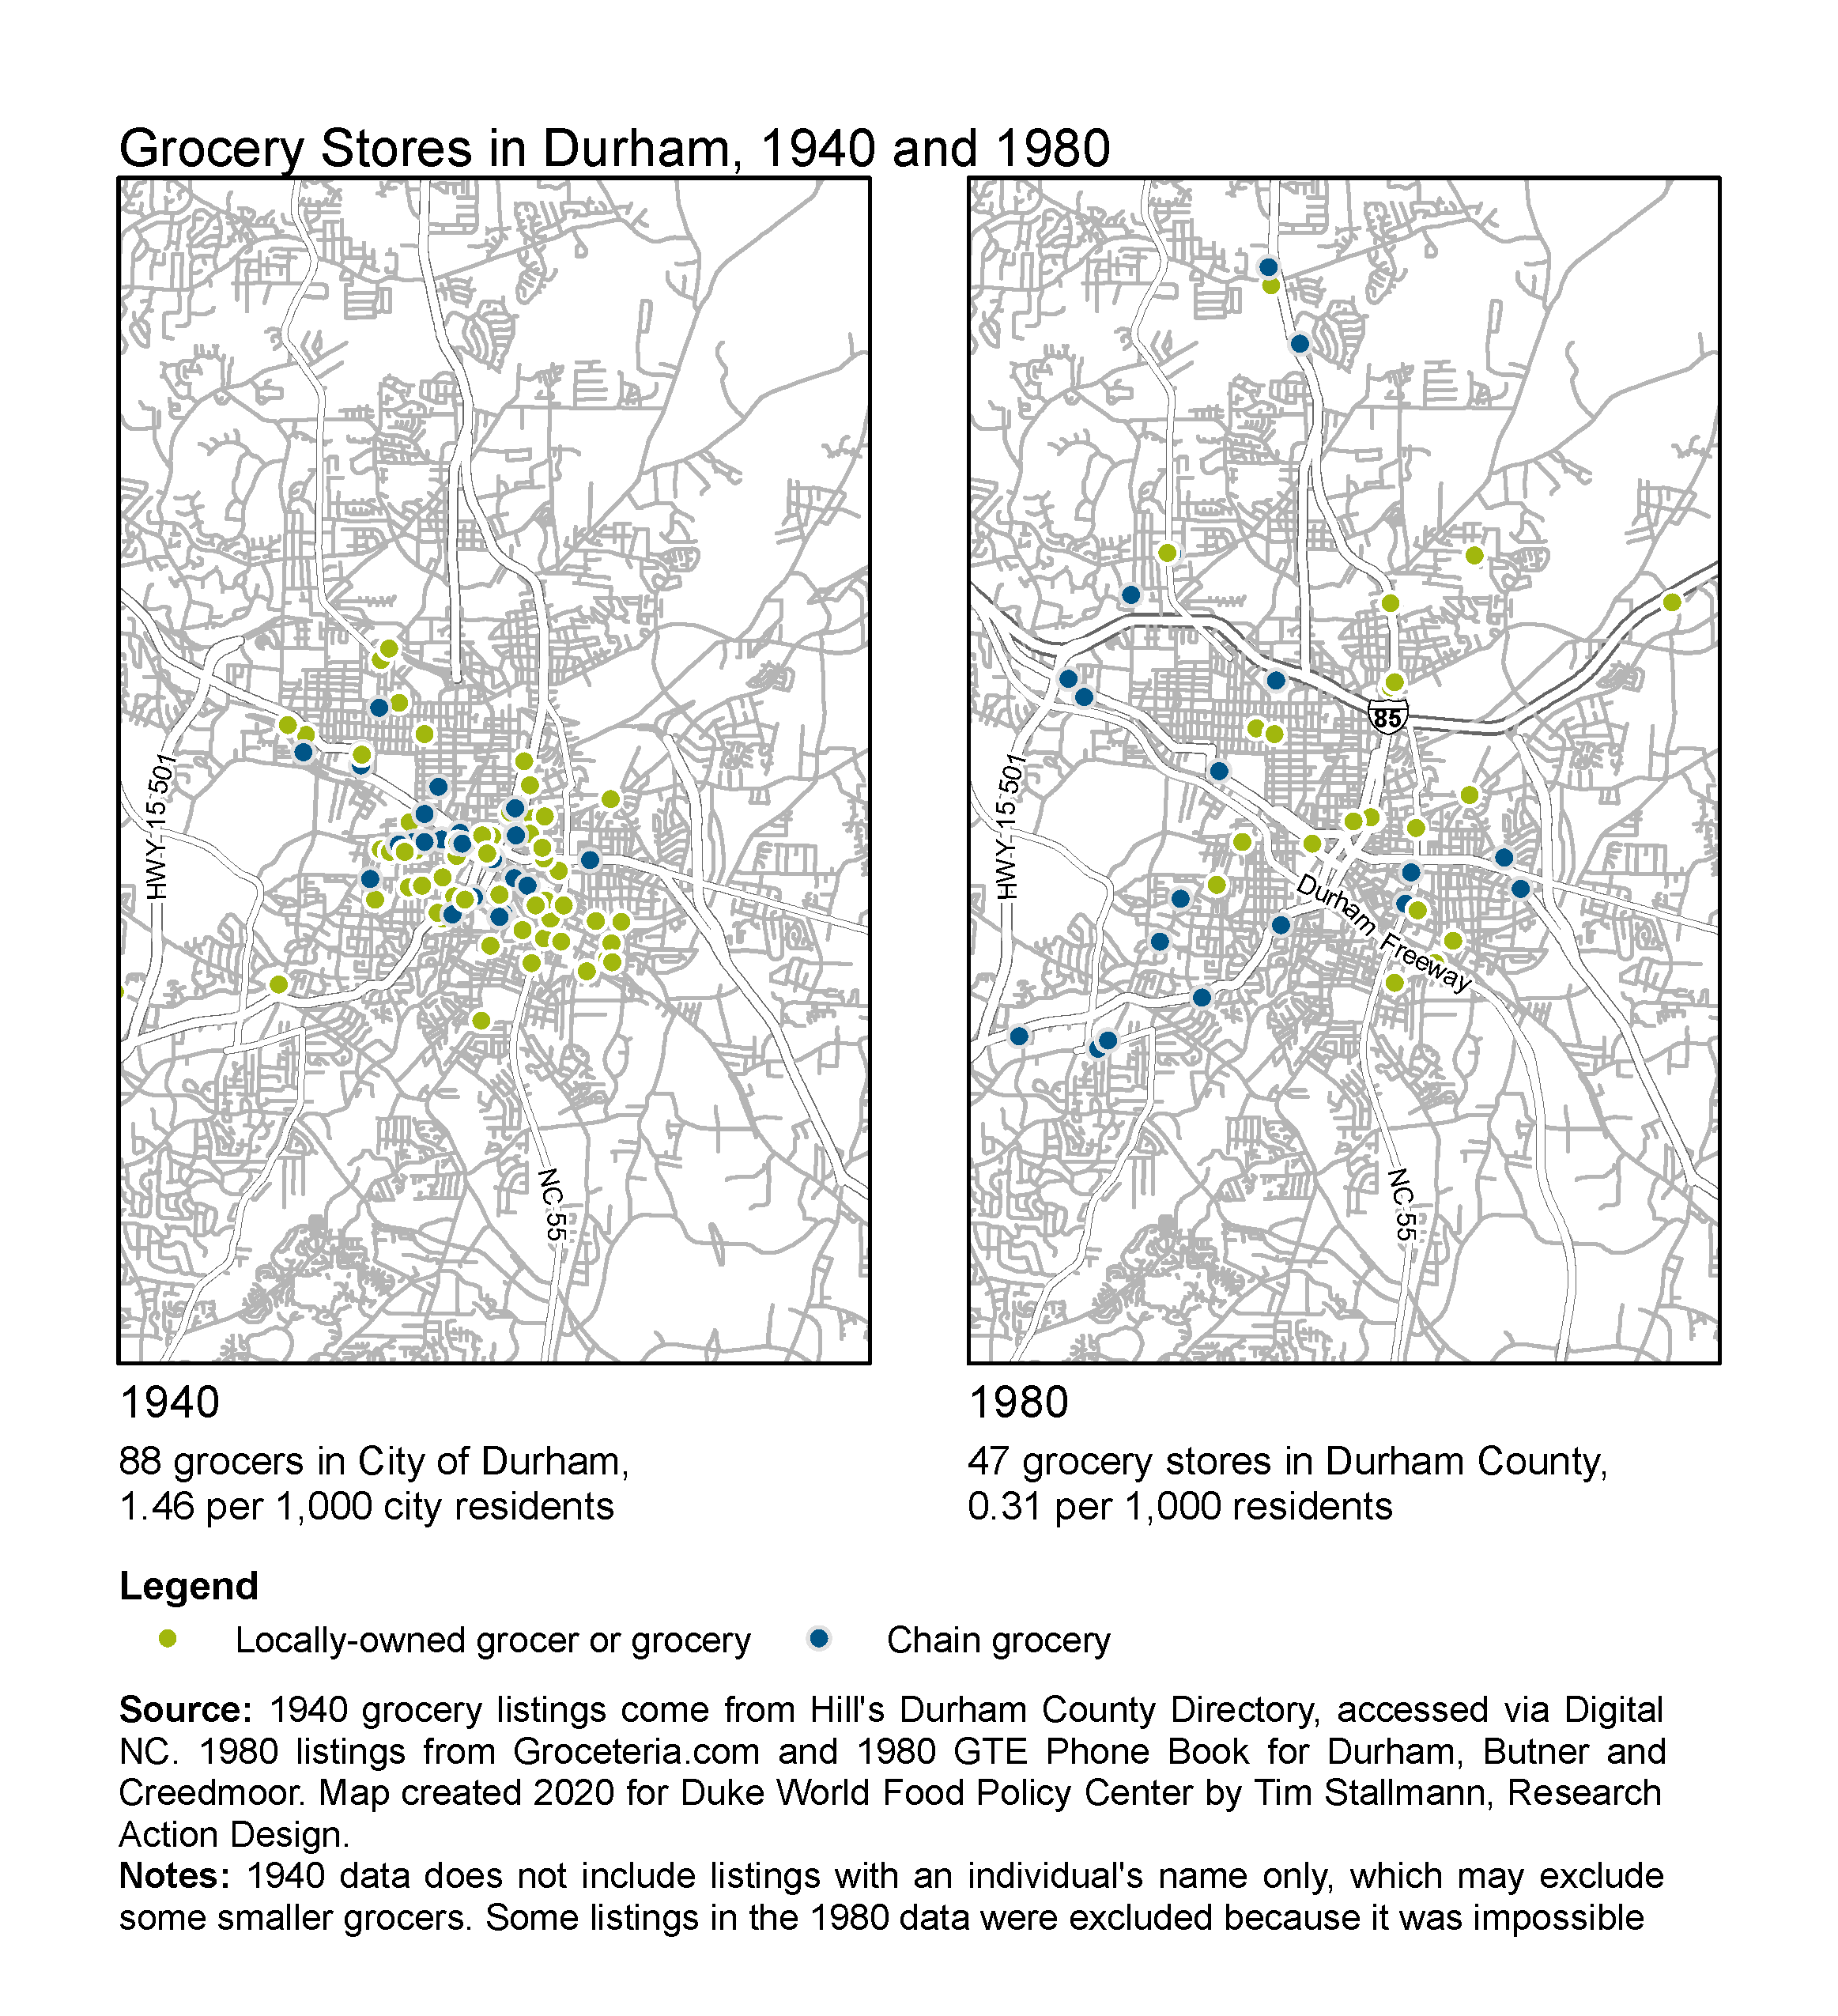 These maps show the differences in grocery store locations and ownership in 1940 and 1980. While there is a dramatic reduction of grocery stores across the city, Hayti and the urban renewal area are strikingly void of grocery stores.